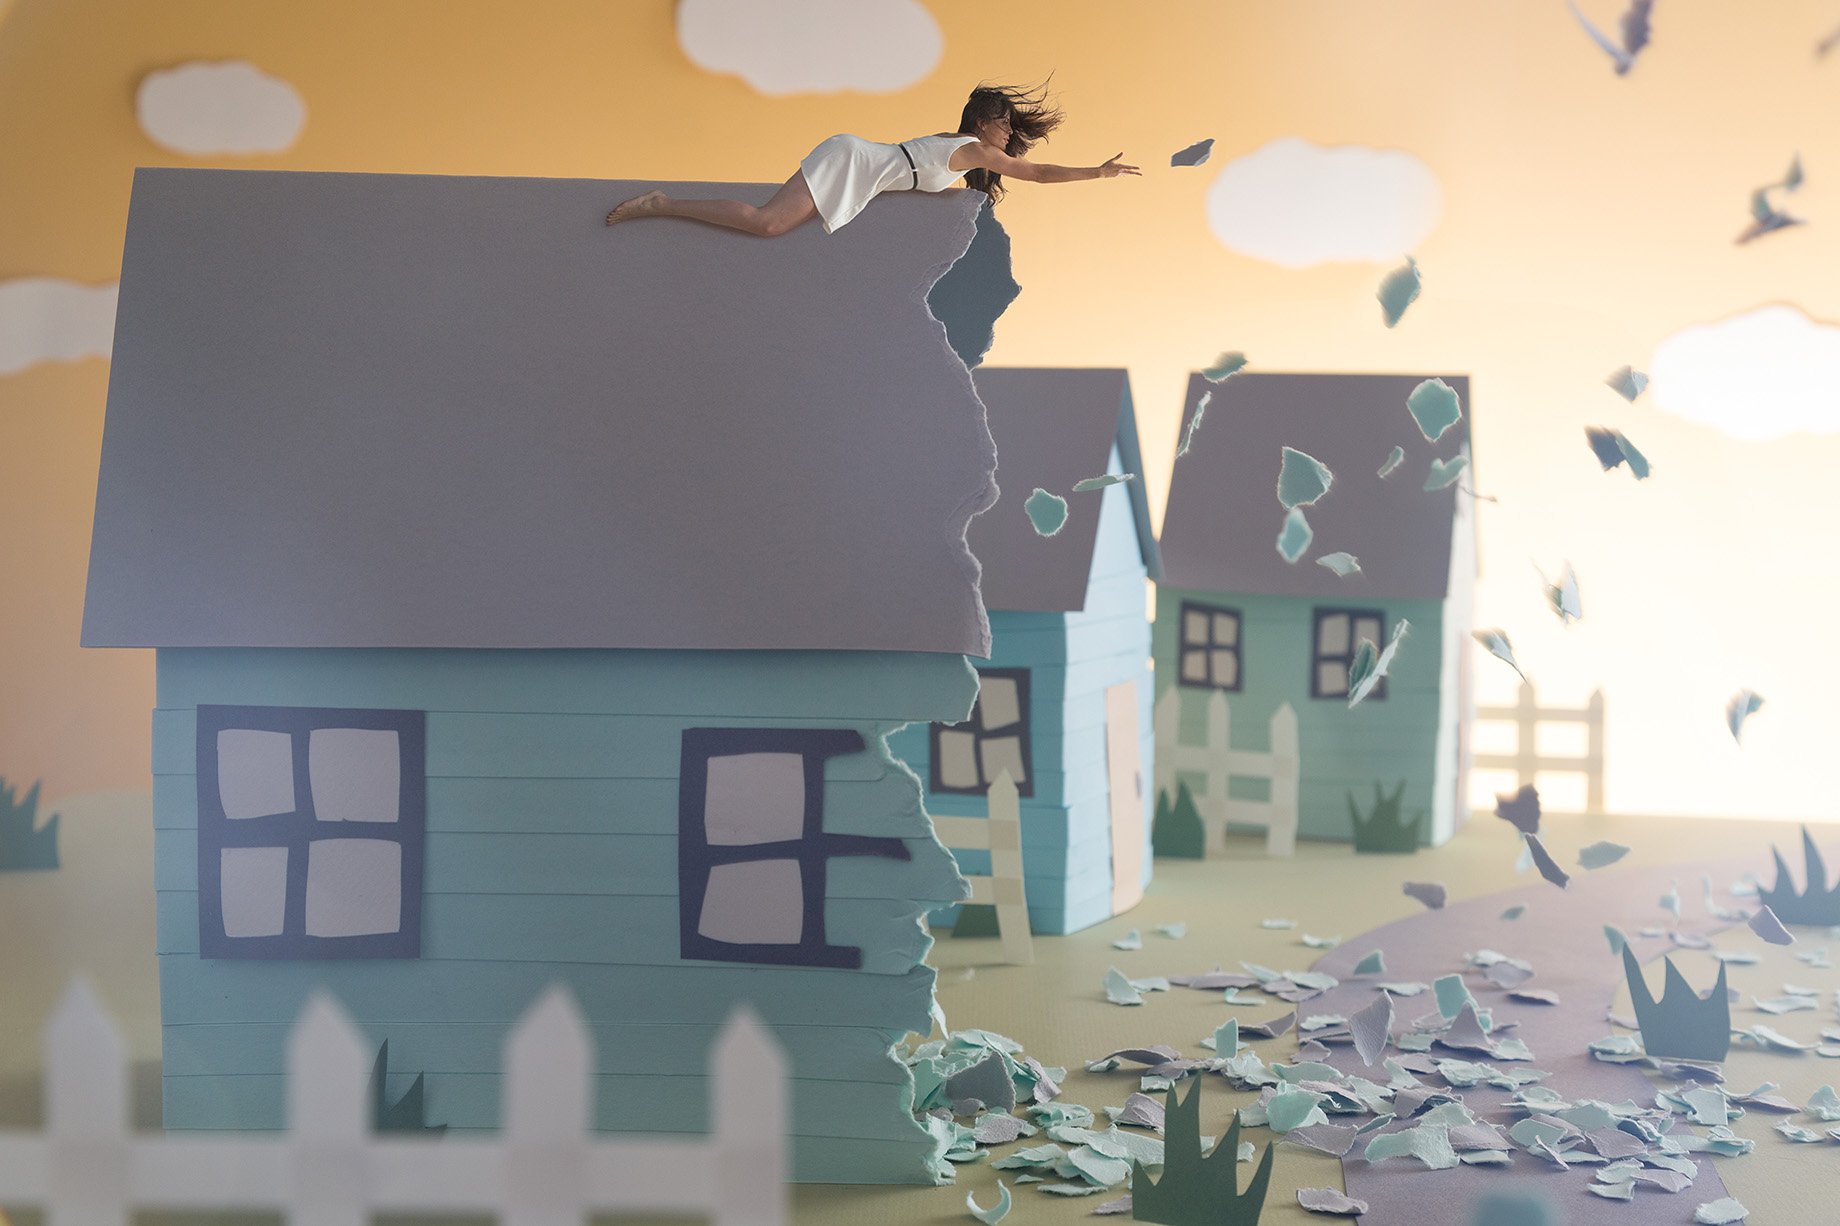 Woman on roof reaches out as house tears away made from construction paper shot by Patrick Heageny for Paper Thin